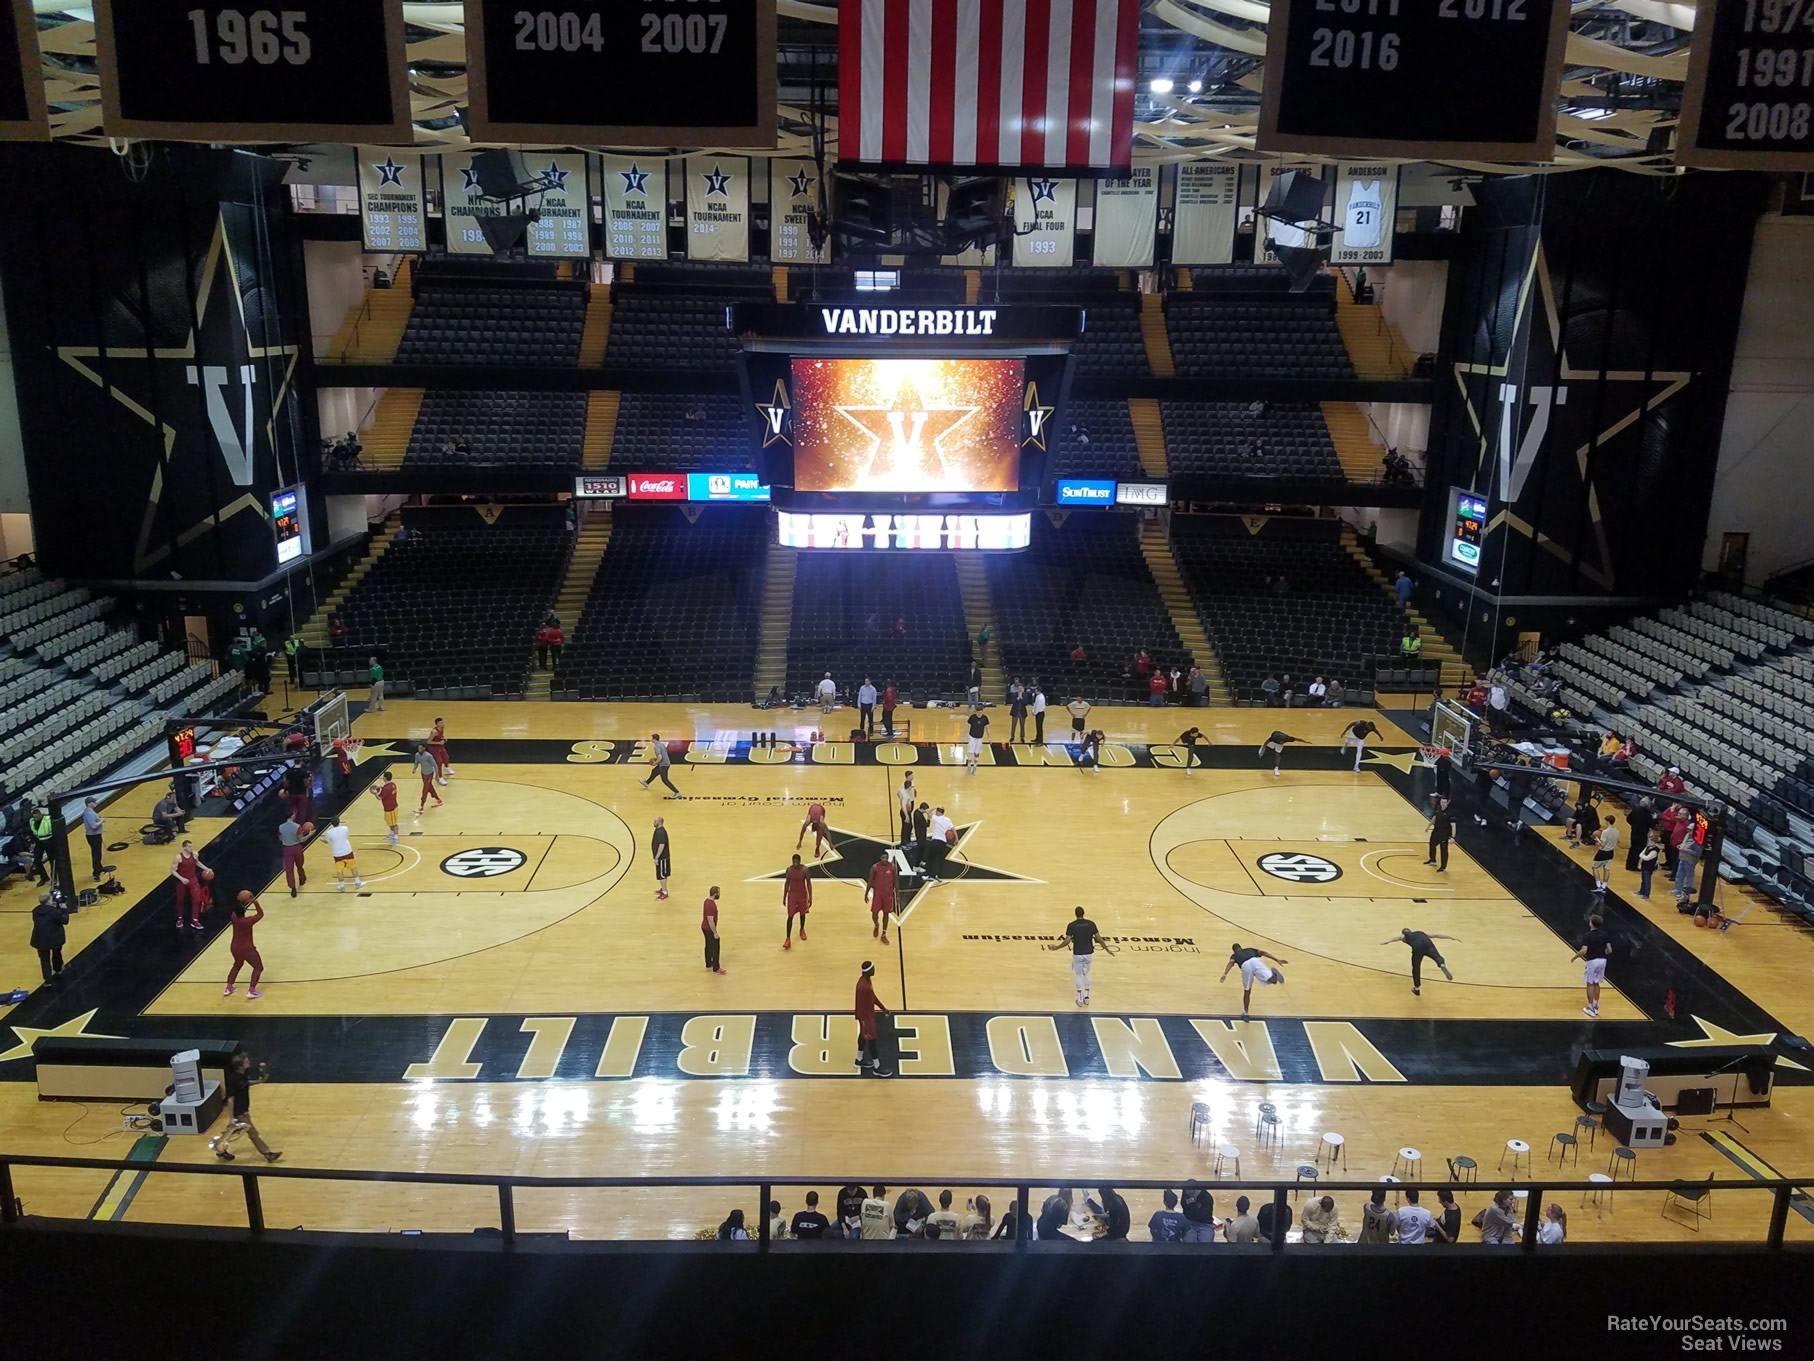 section 3i, row 7 seat view  - memorial gymnasium